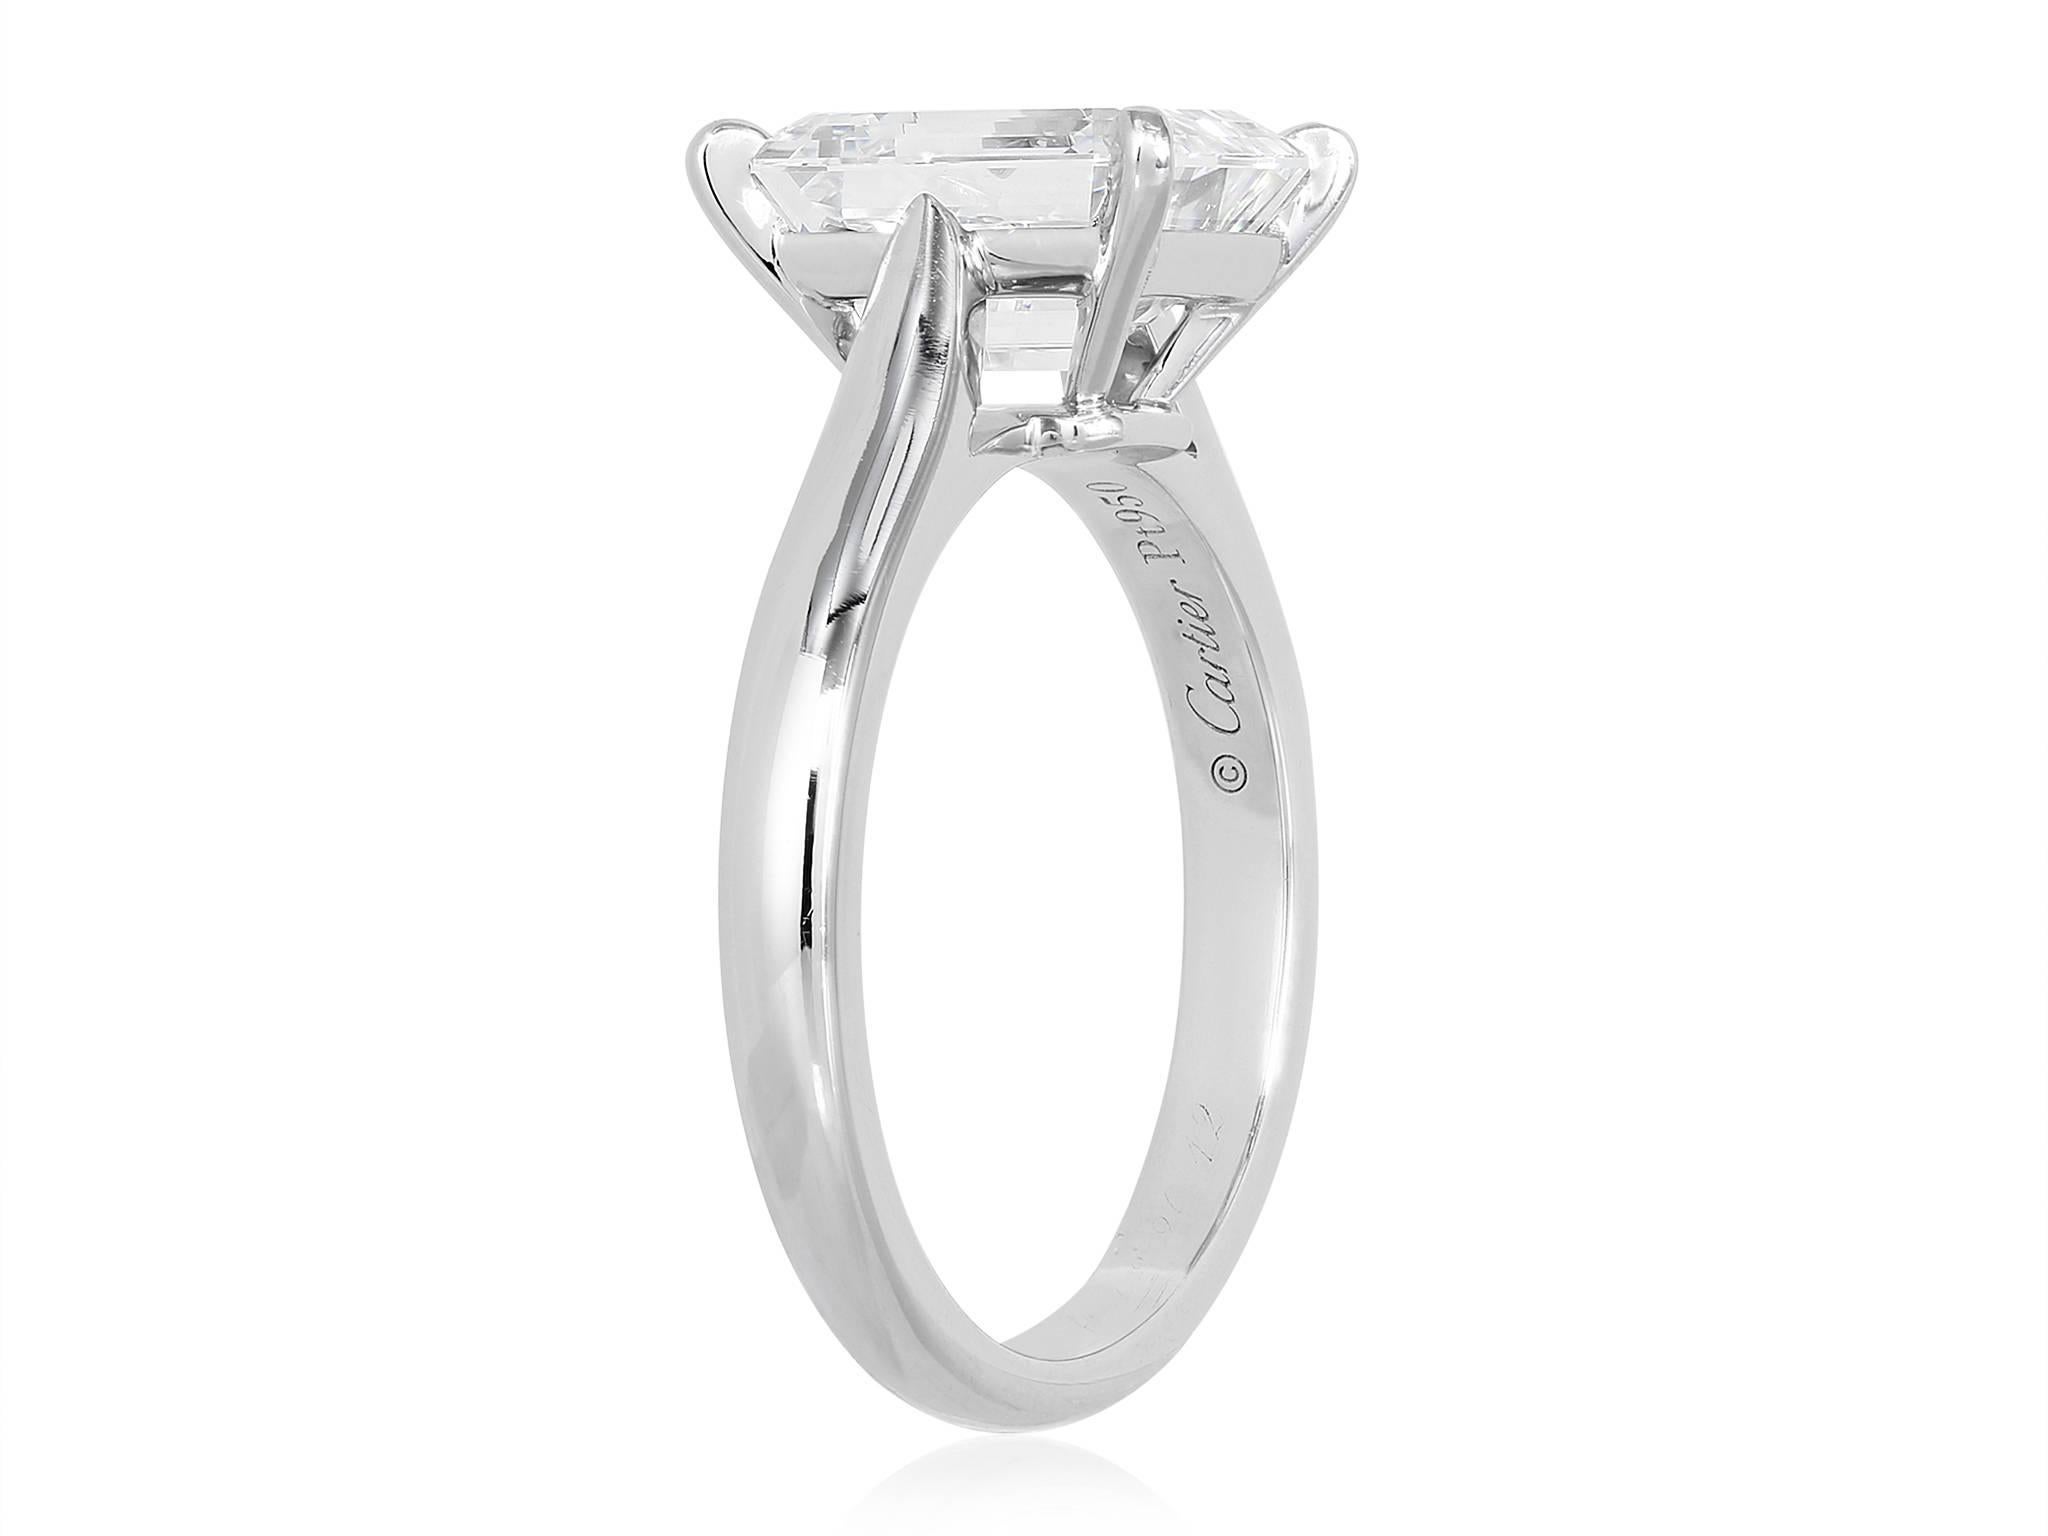 Platinum, custom made, GIA certified 6.41 carat emerald cut diamond solitaire engagement ring. Color and clarity J/SI1, GIA report #5181852985.